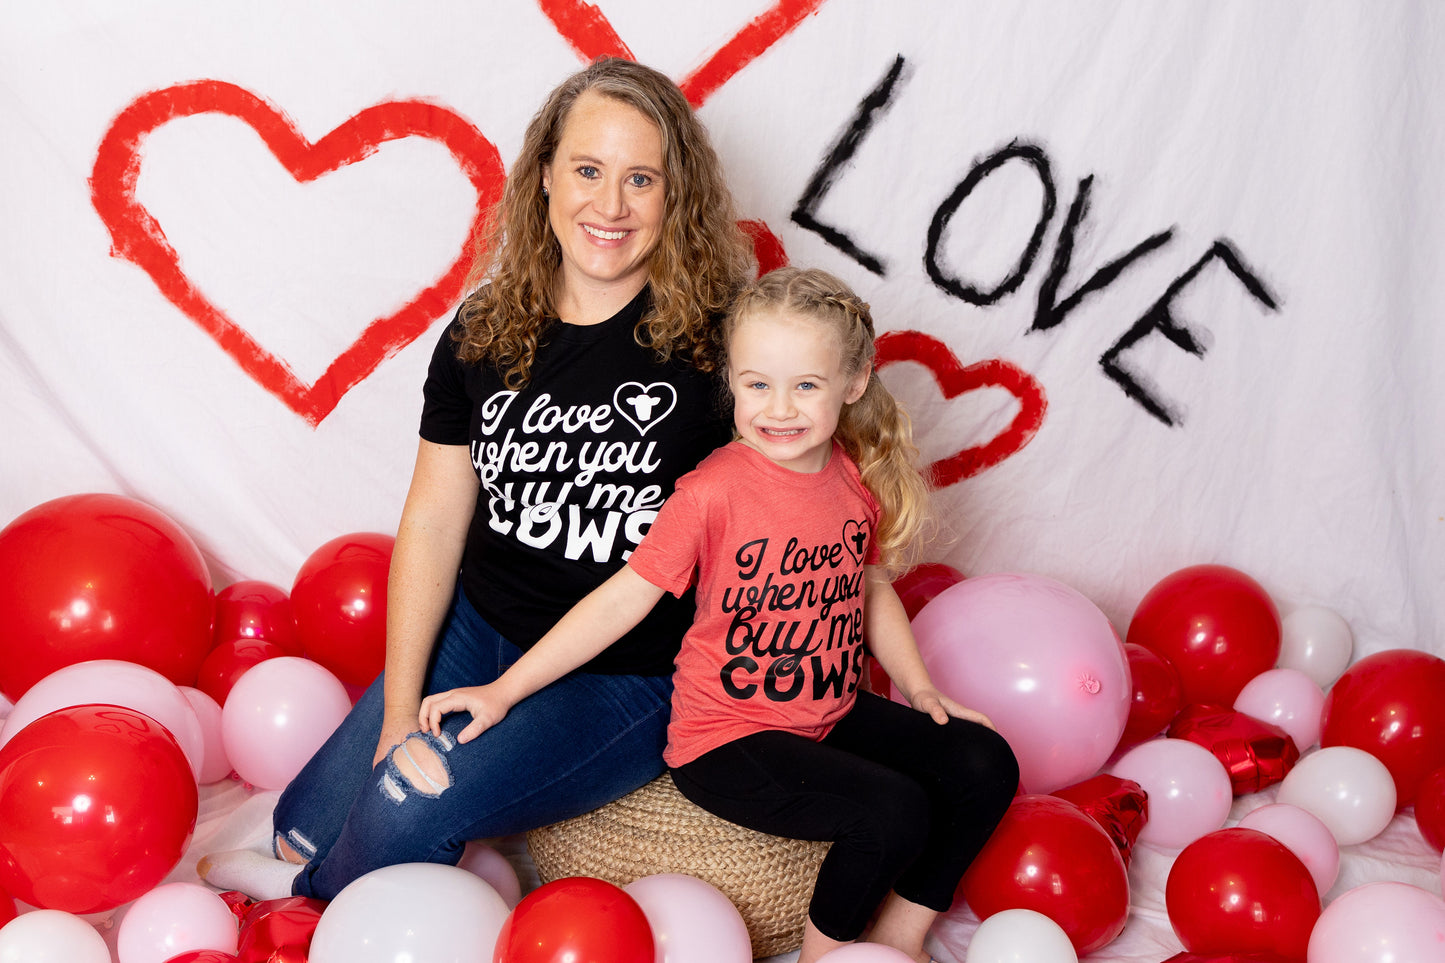 I love when you buy me cows t-shirt on adult model and child model with red and pink balloons